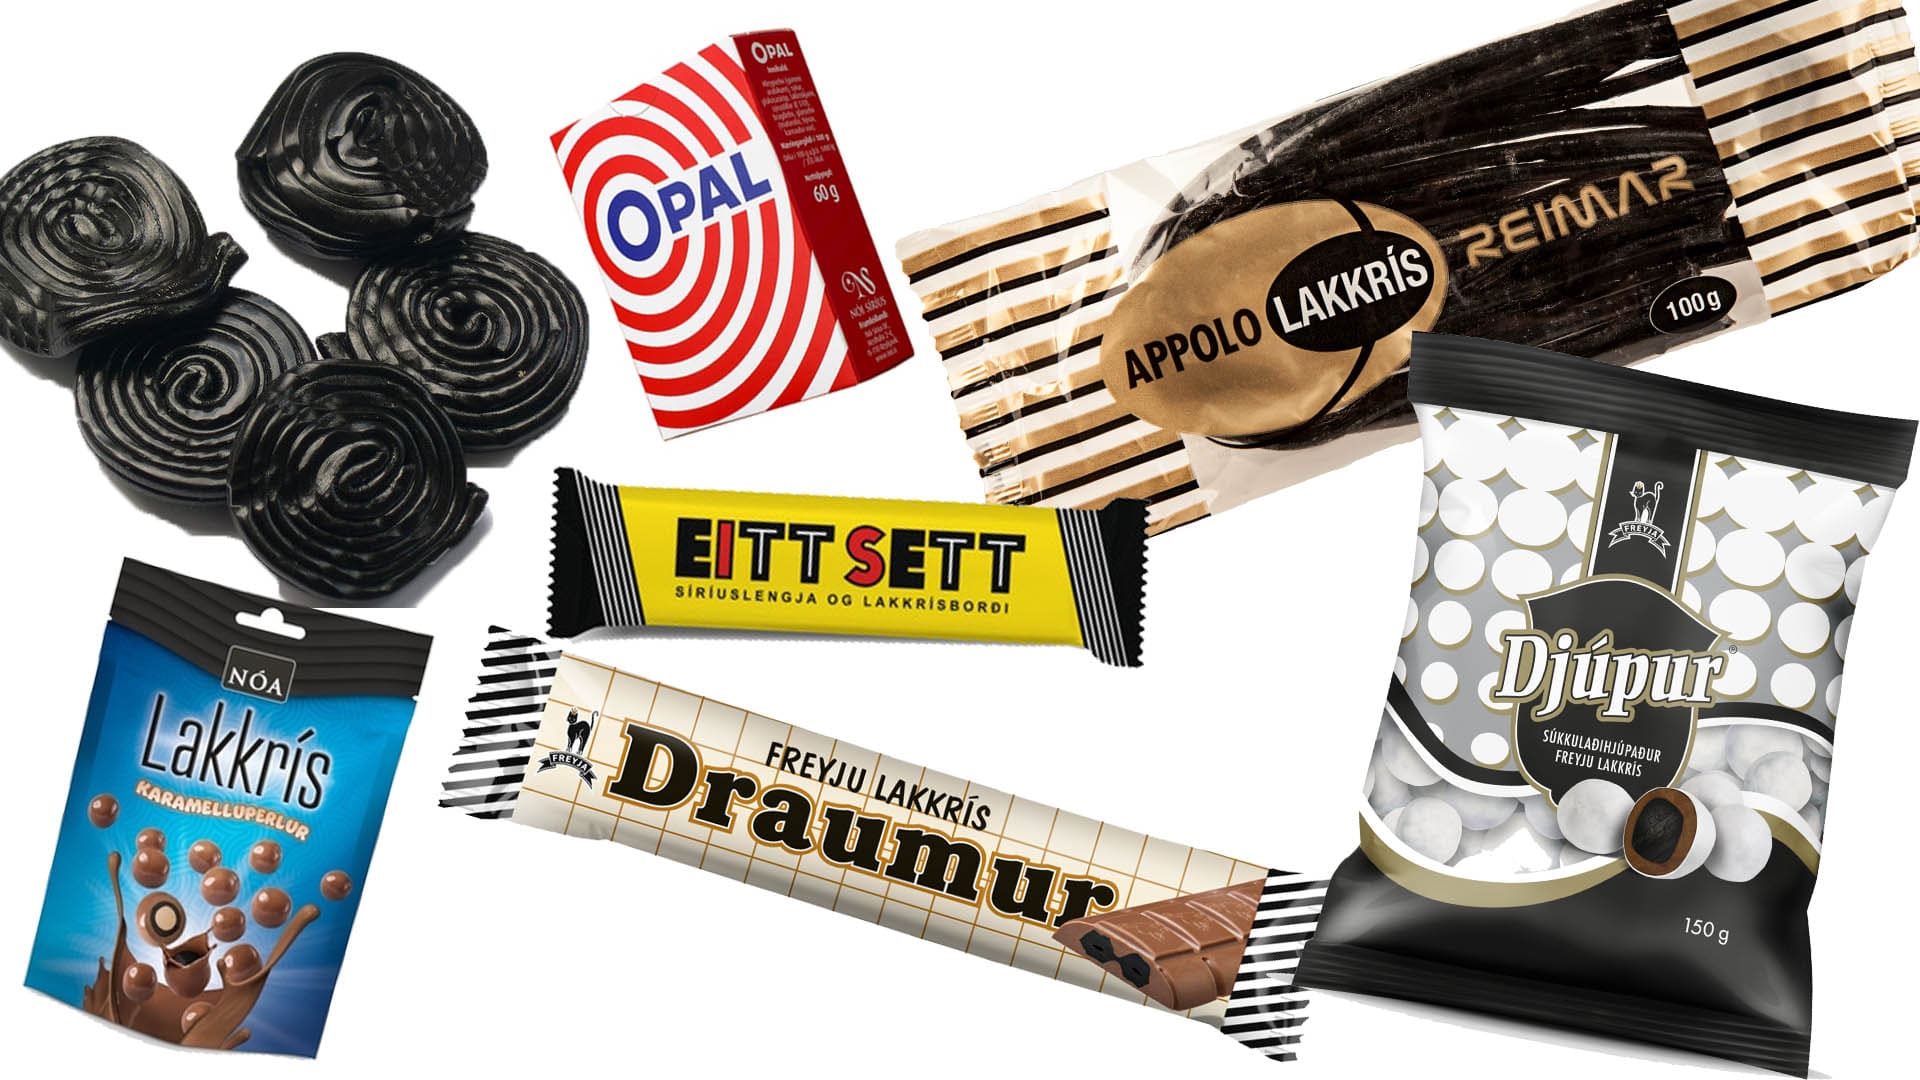 A selection of our famous liquorice filled chocalates!